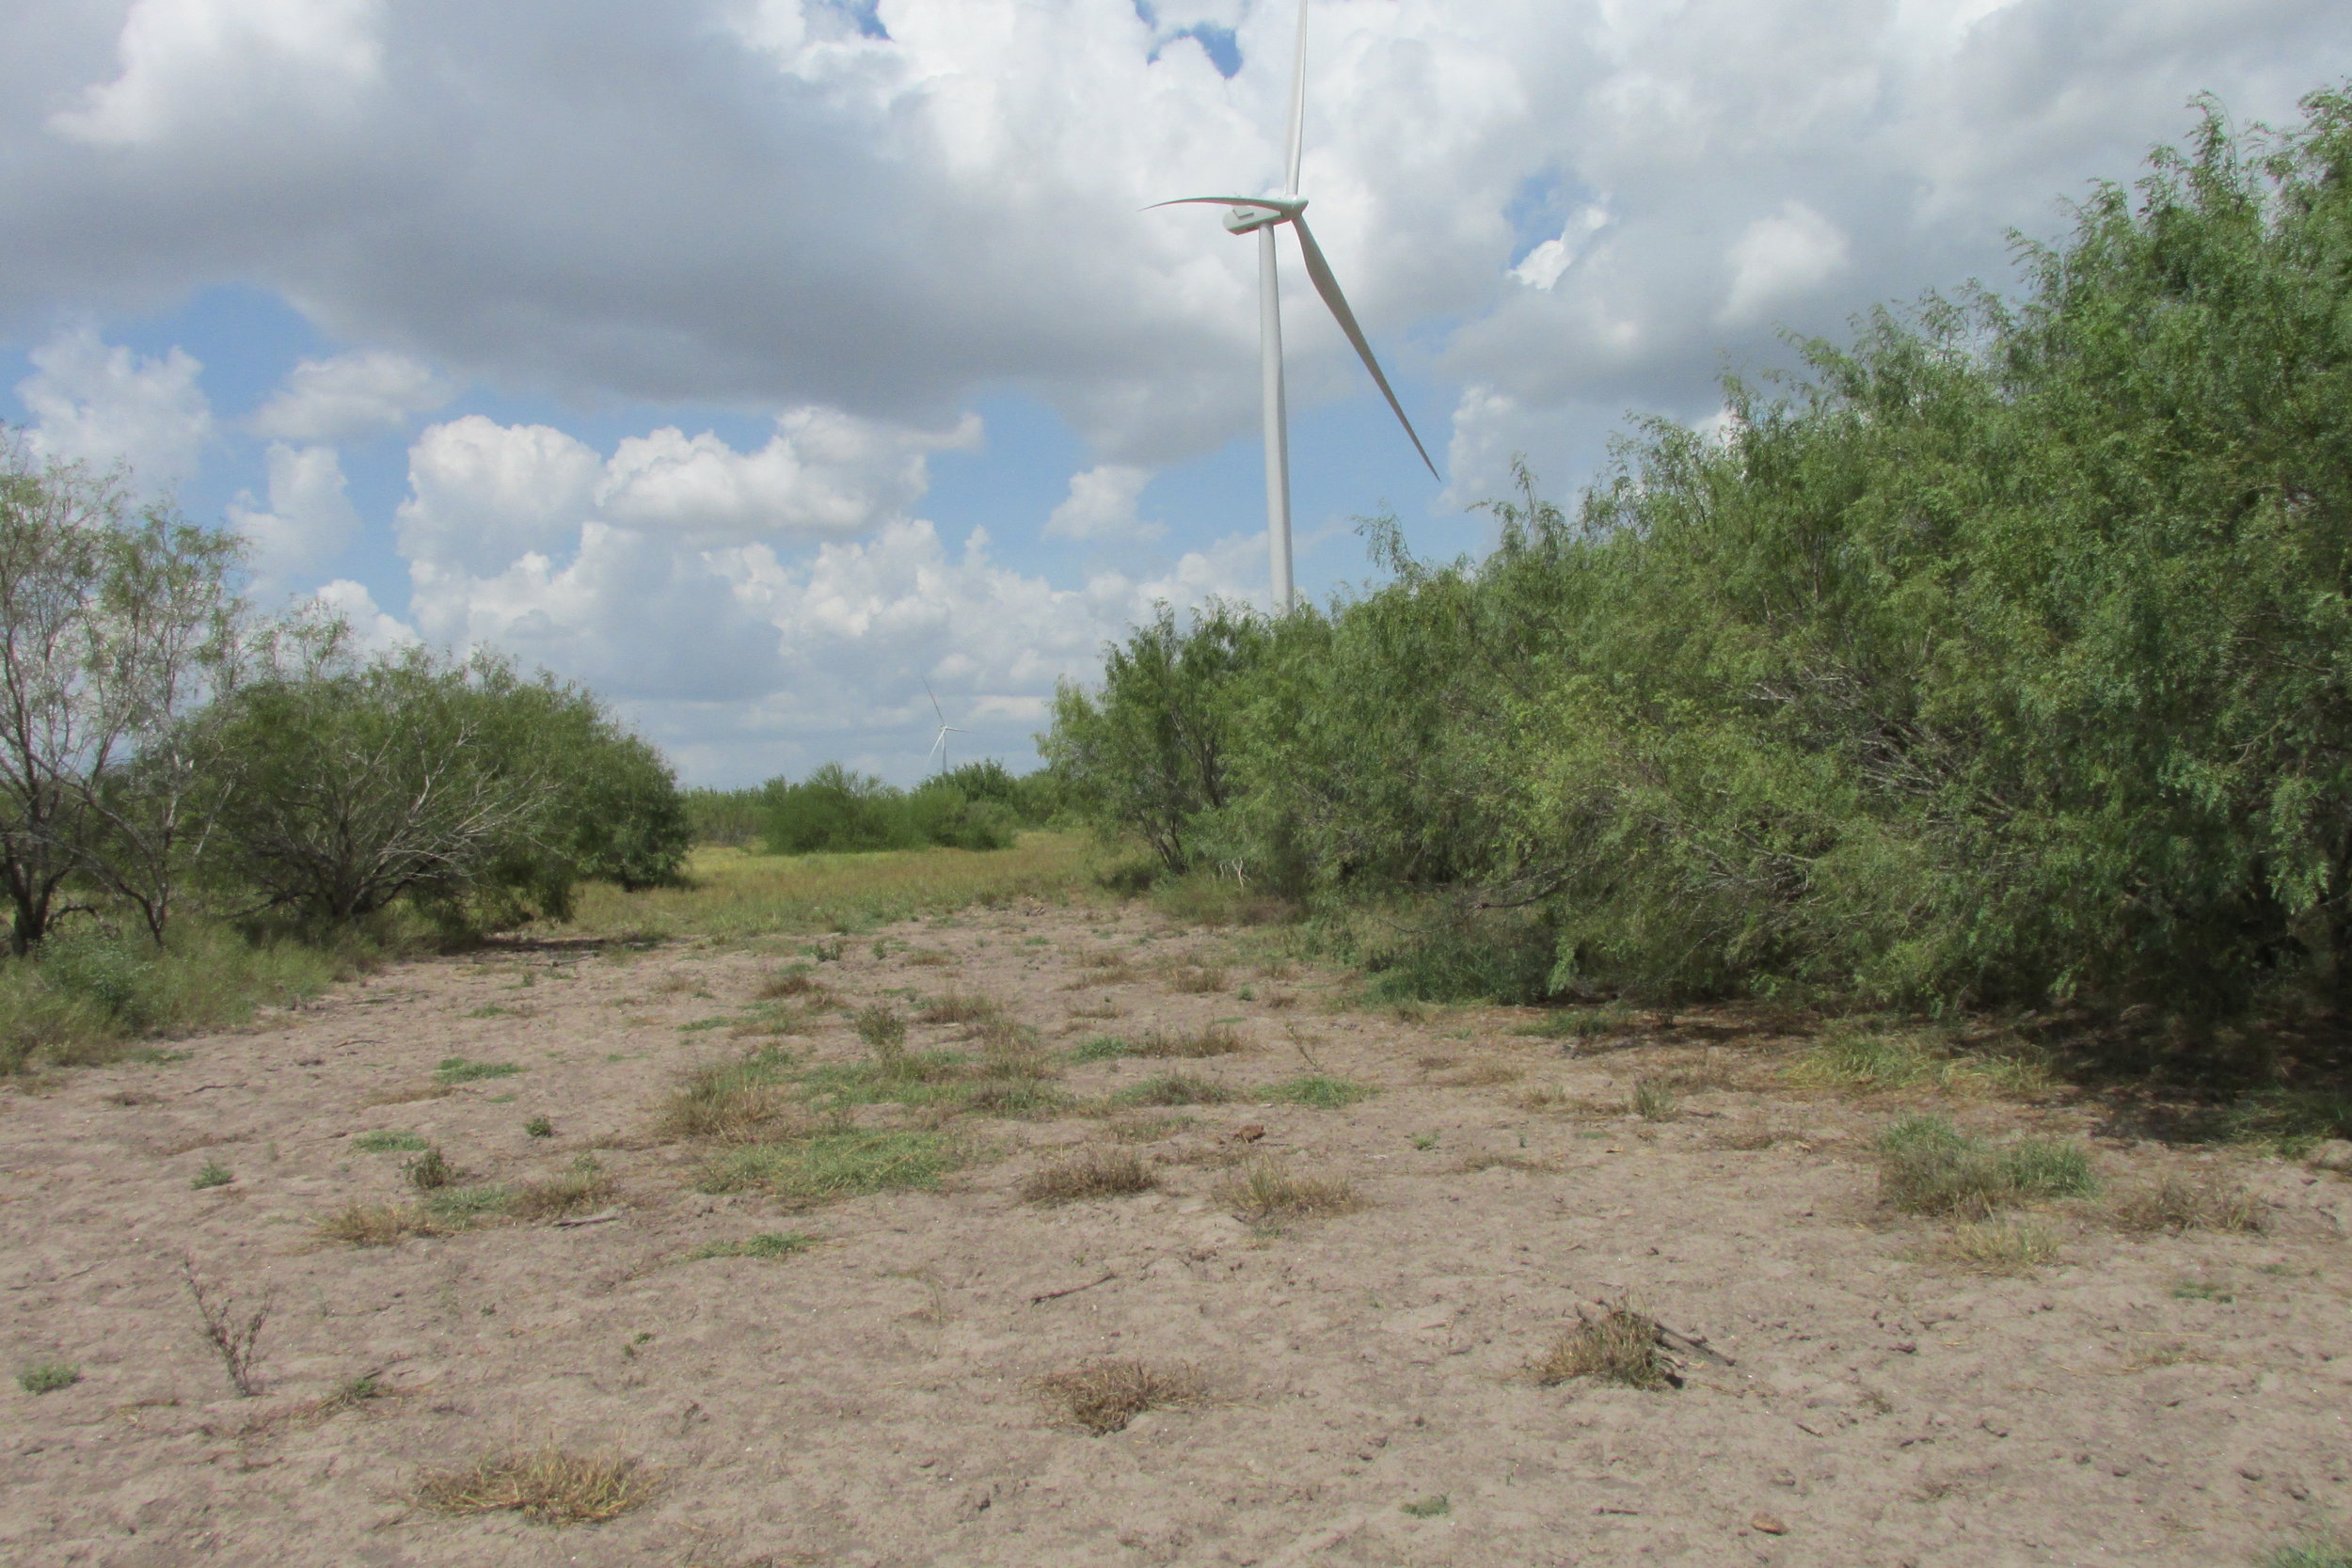 Los Vientos III, IV, and V Wind Projects - Wetland Delineation